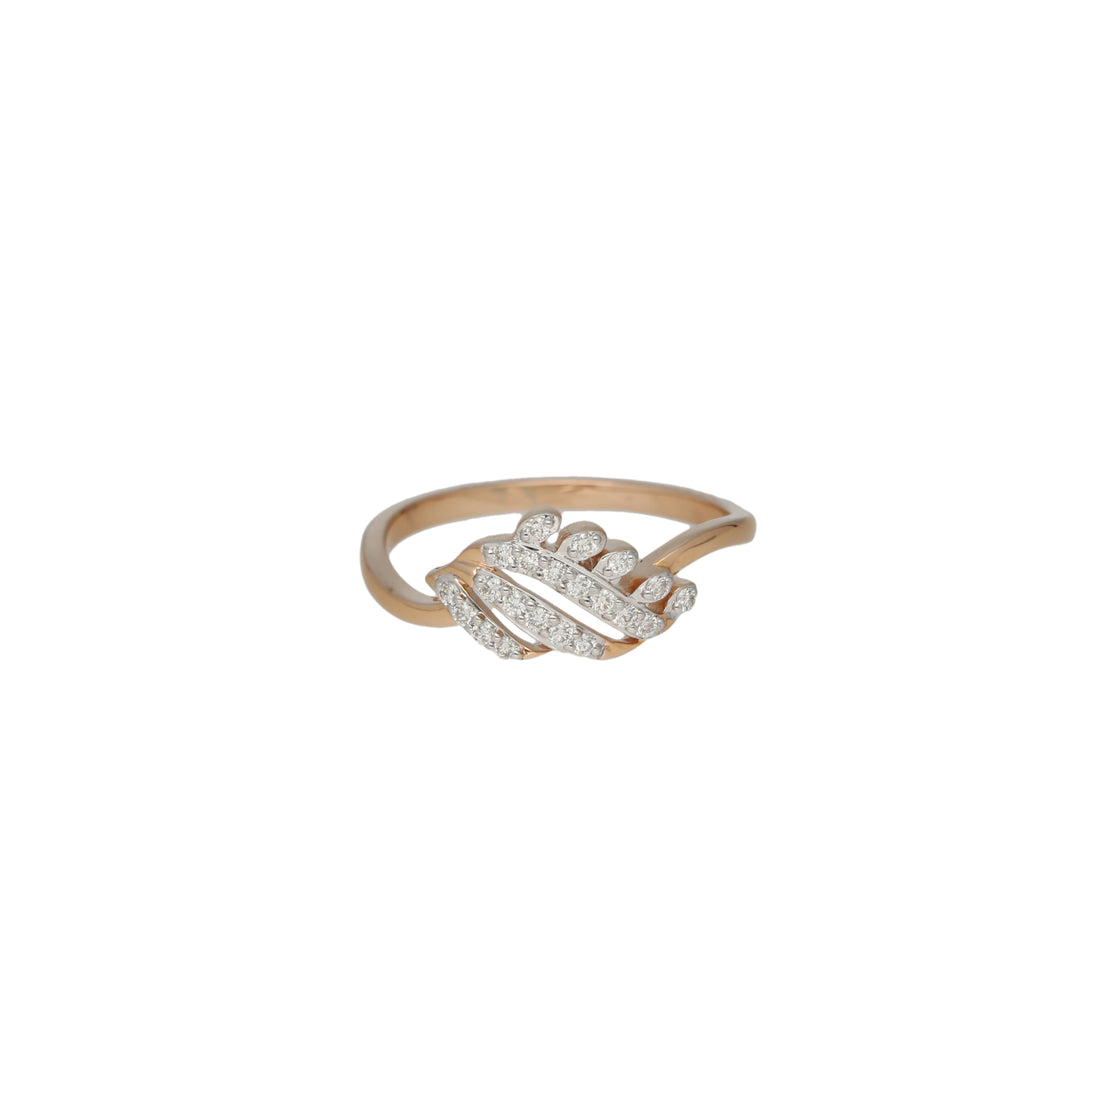 Buy Mia by Tanishq by Tanishq 14KT Rose Gold Diamond Finger Ring 17.20 mm  Online - Best Price Mia by Tanishq by Tanishq 14KT Rose Gold Diamond Finger  Ring 17.20 mm - Justdial Shop Online.